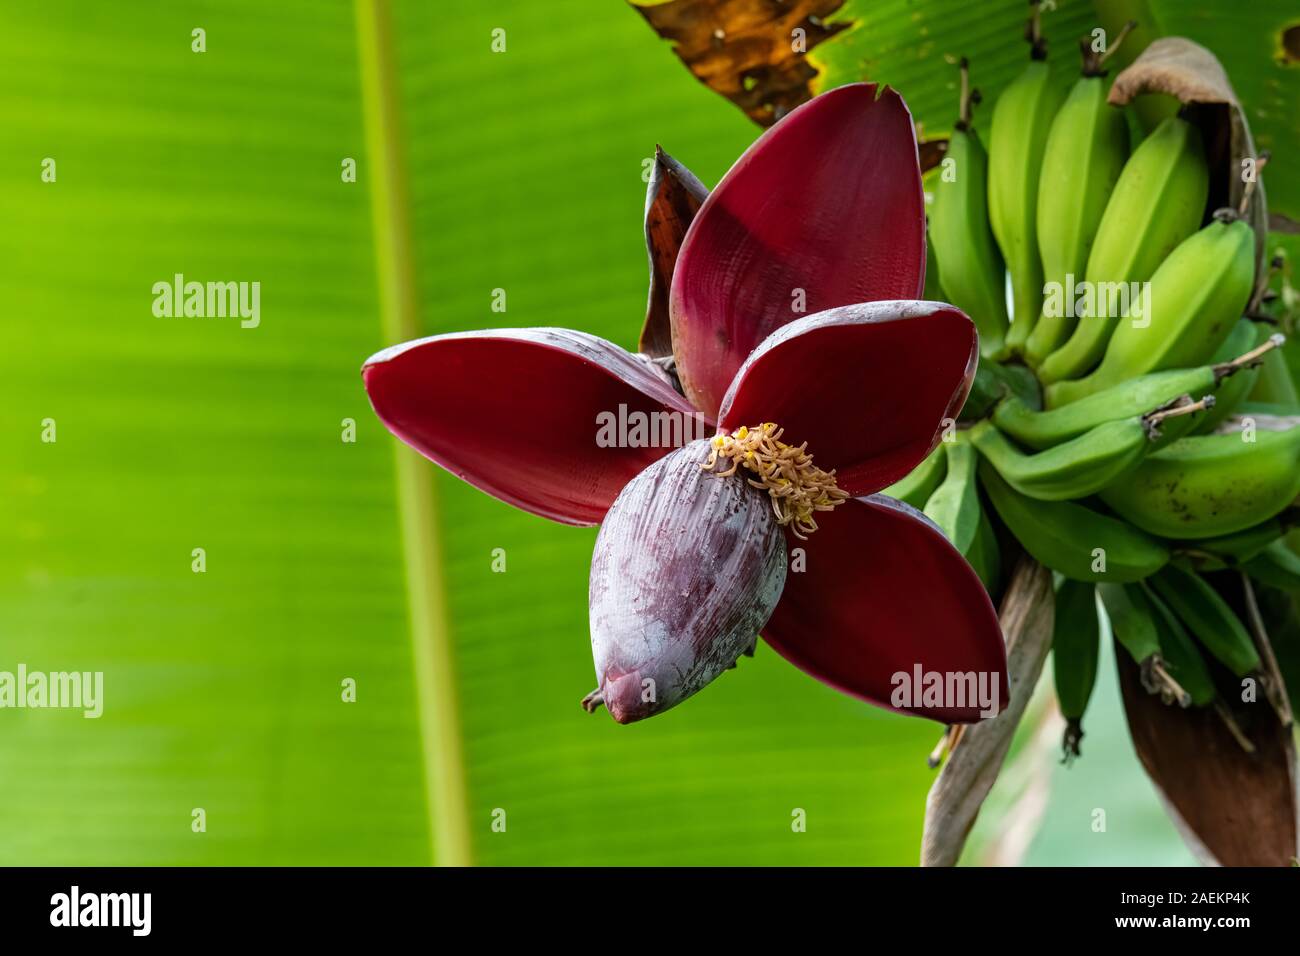 Banana flower bud hanging down from its tree with modified leaf open Stock Photo